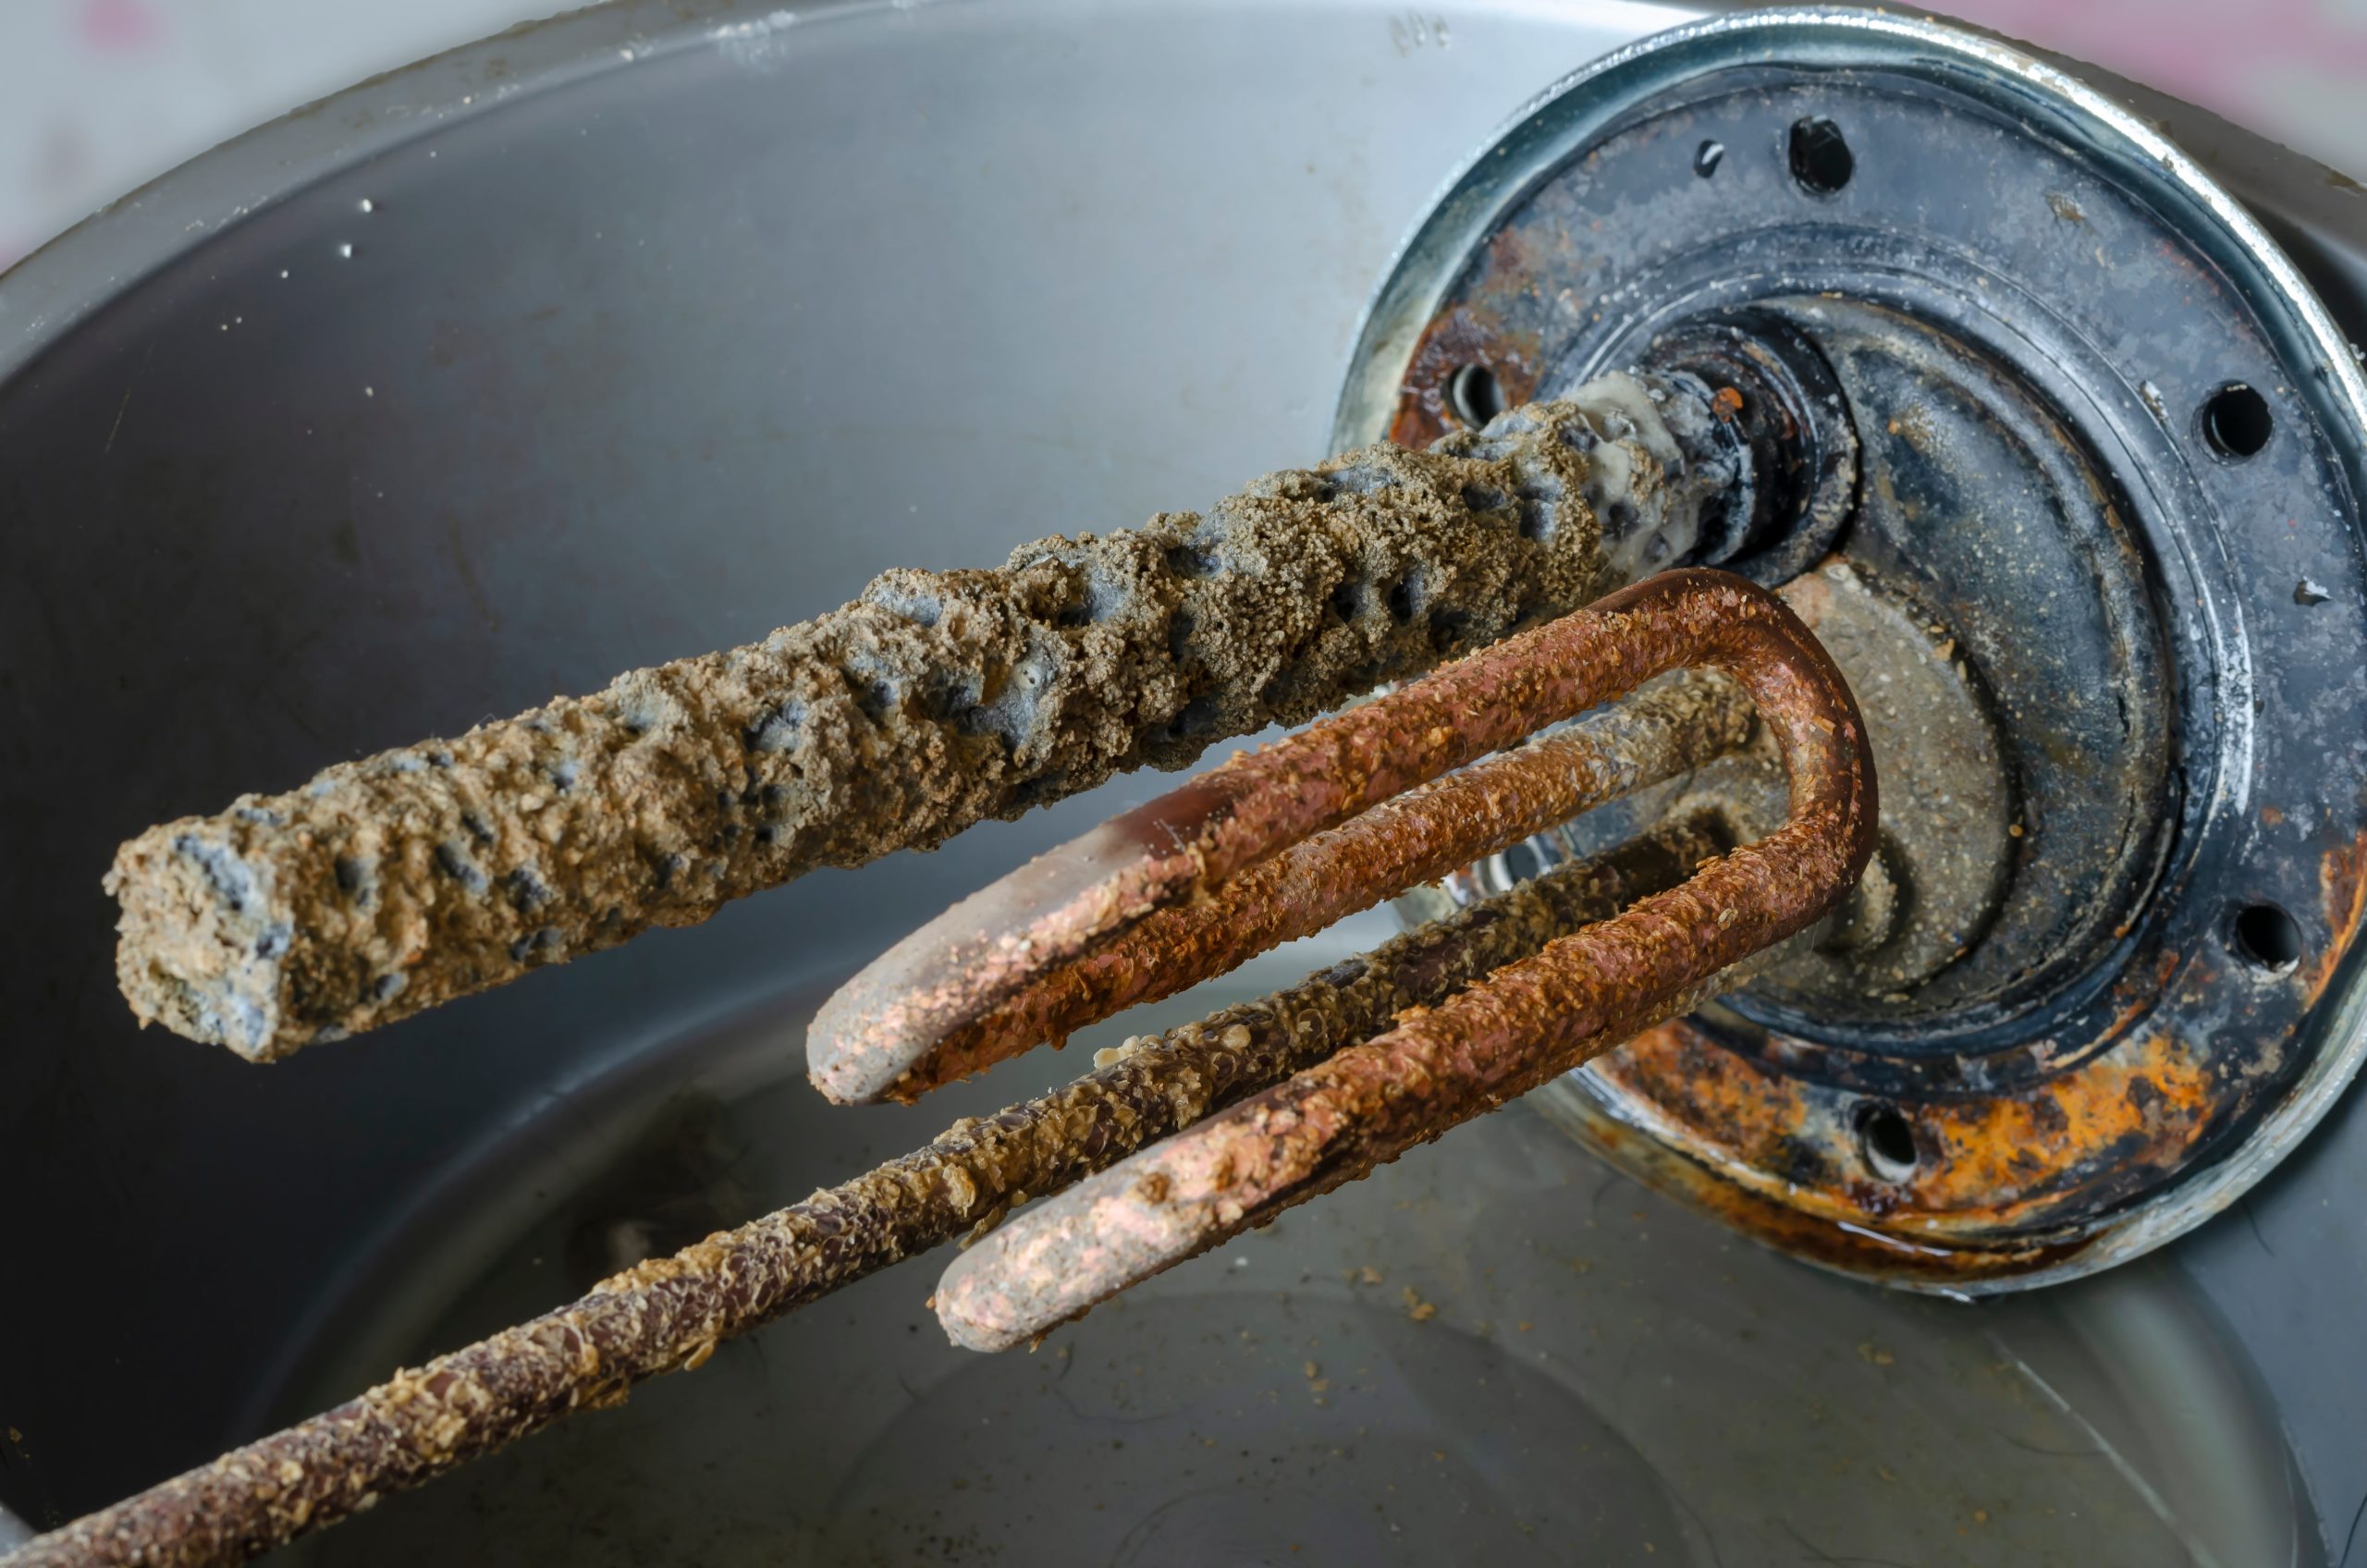 A close-up of a rusted metal object in a sink